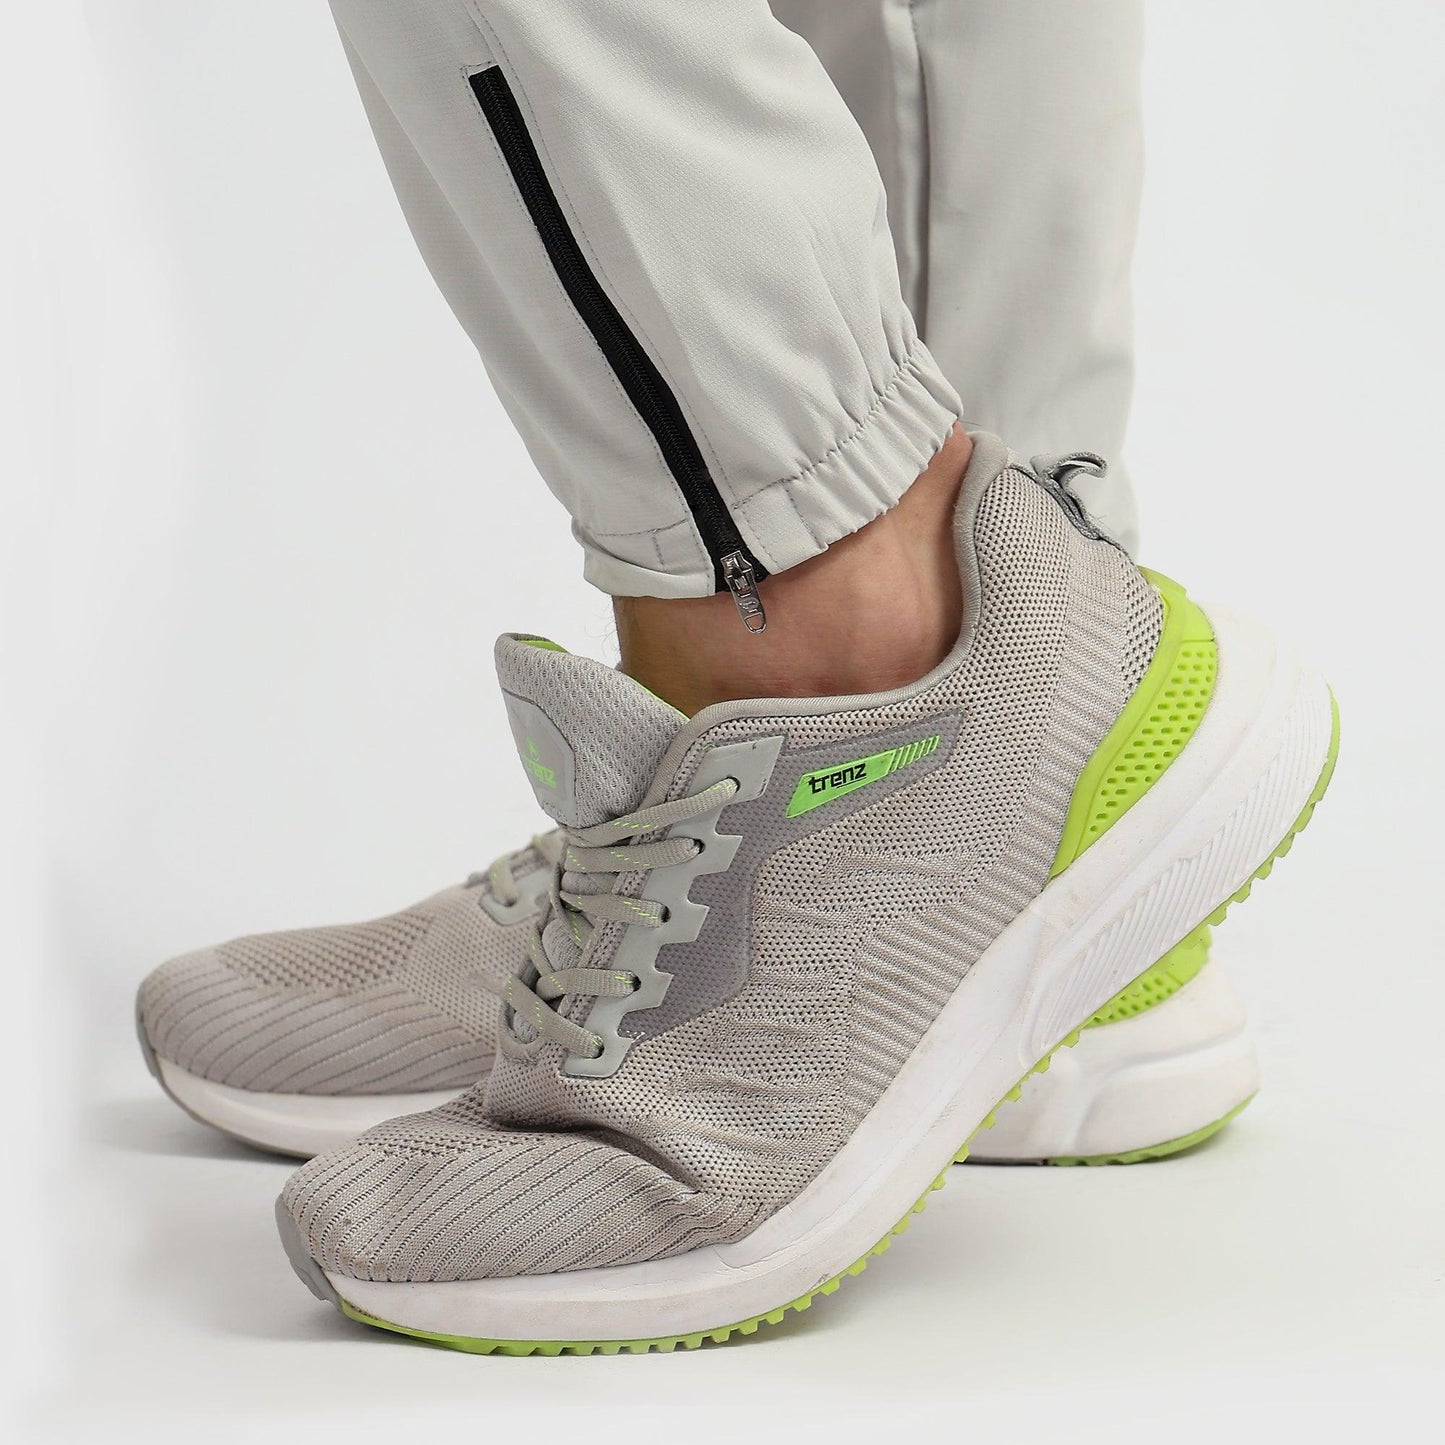 Denmonk: Elevate your look with these Trekcrago sharp light grey Trackpant for mens.